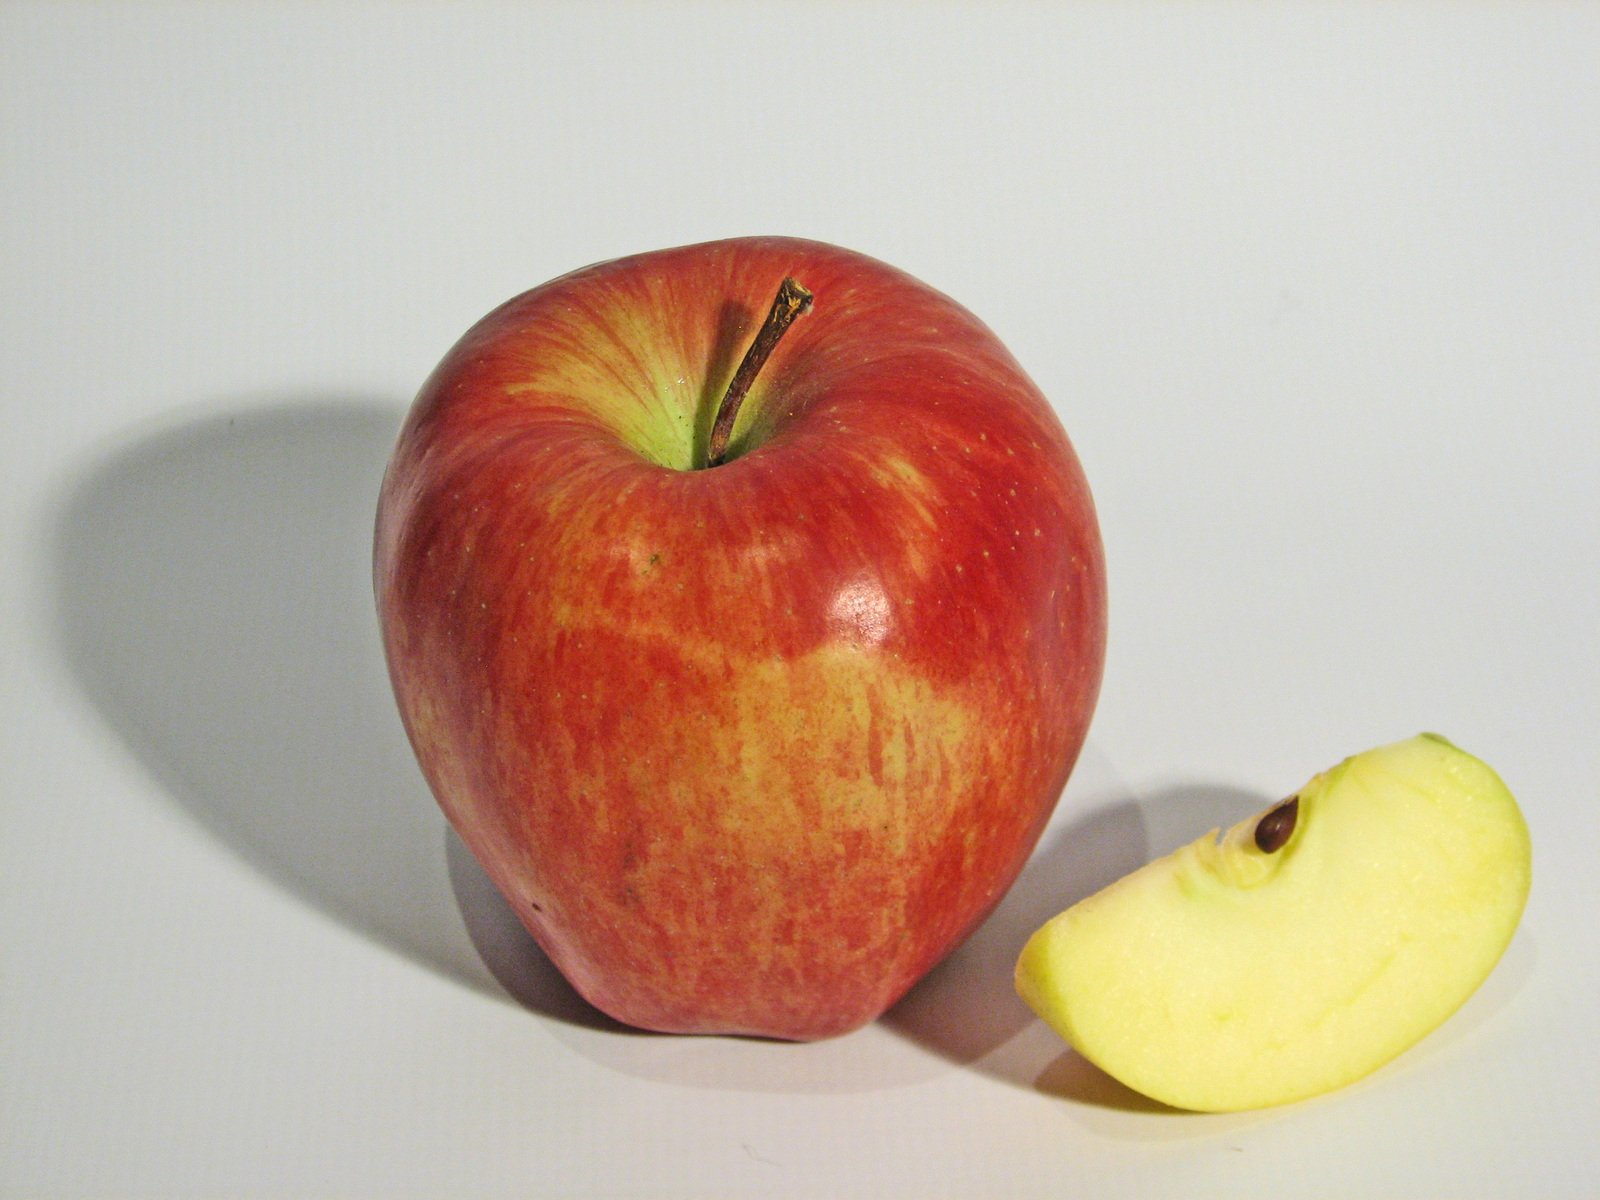 an apple and a half of the apple are shown